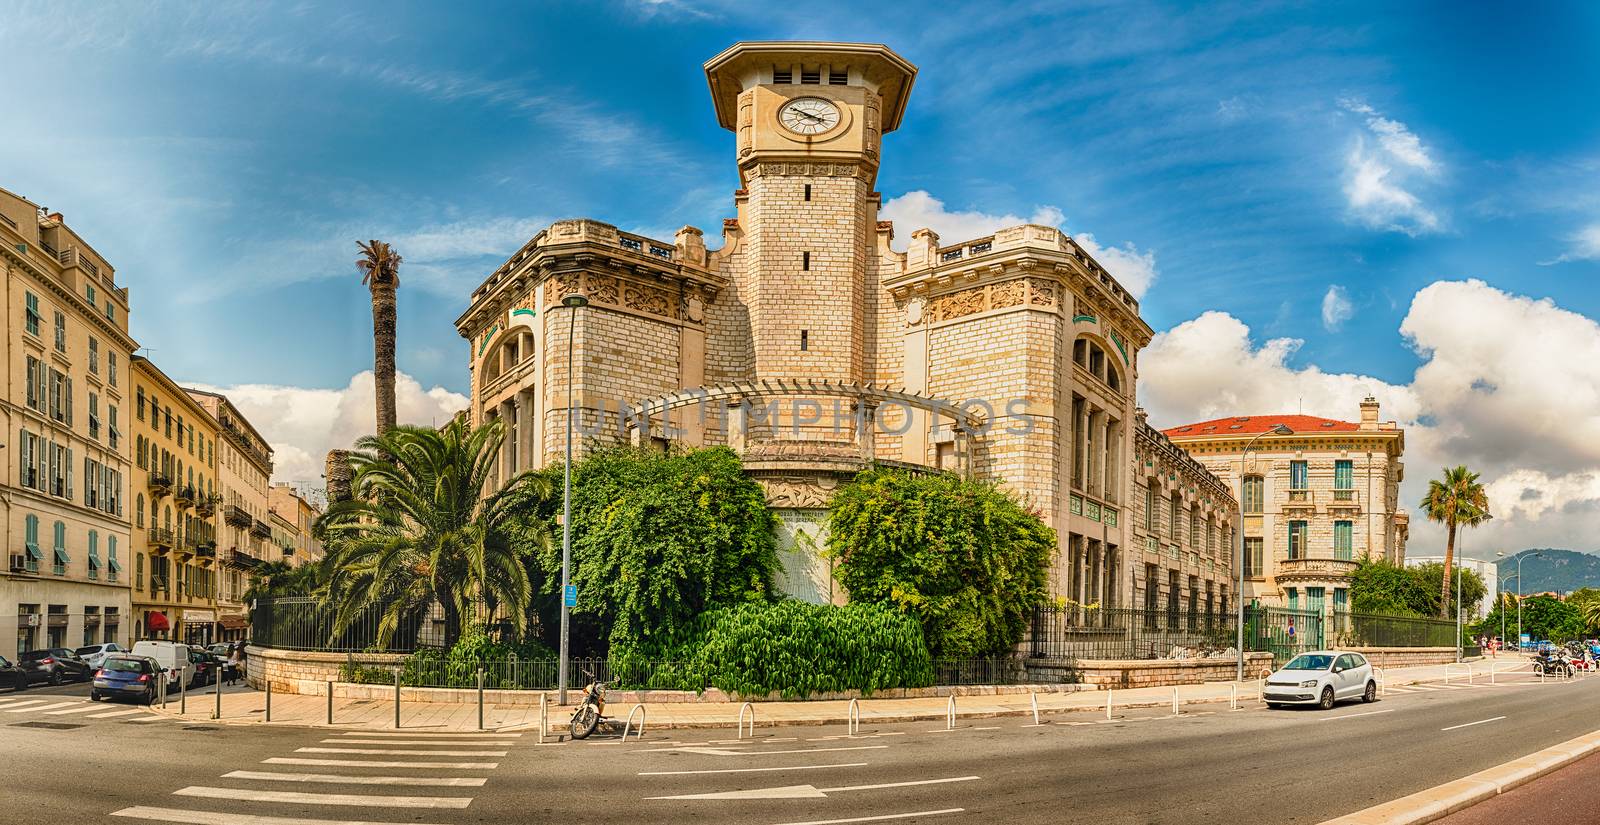 The beautiful architecture of Lycee Massena, iconic building in the city centre of Nice, Cote d'Azur, France